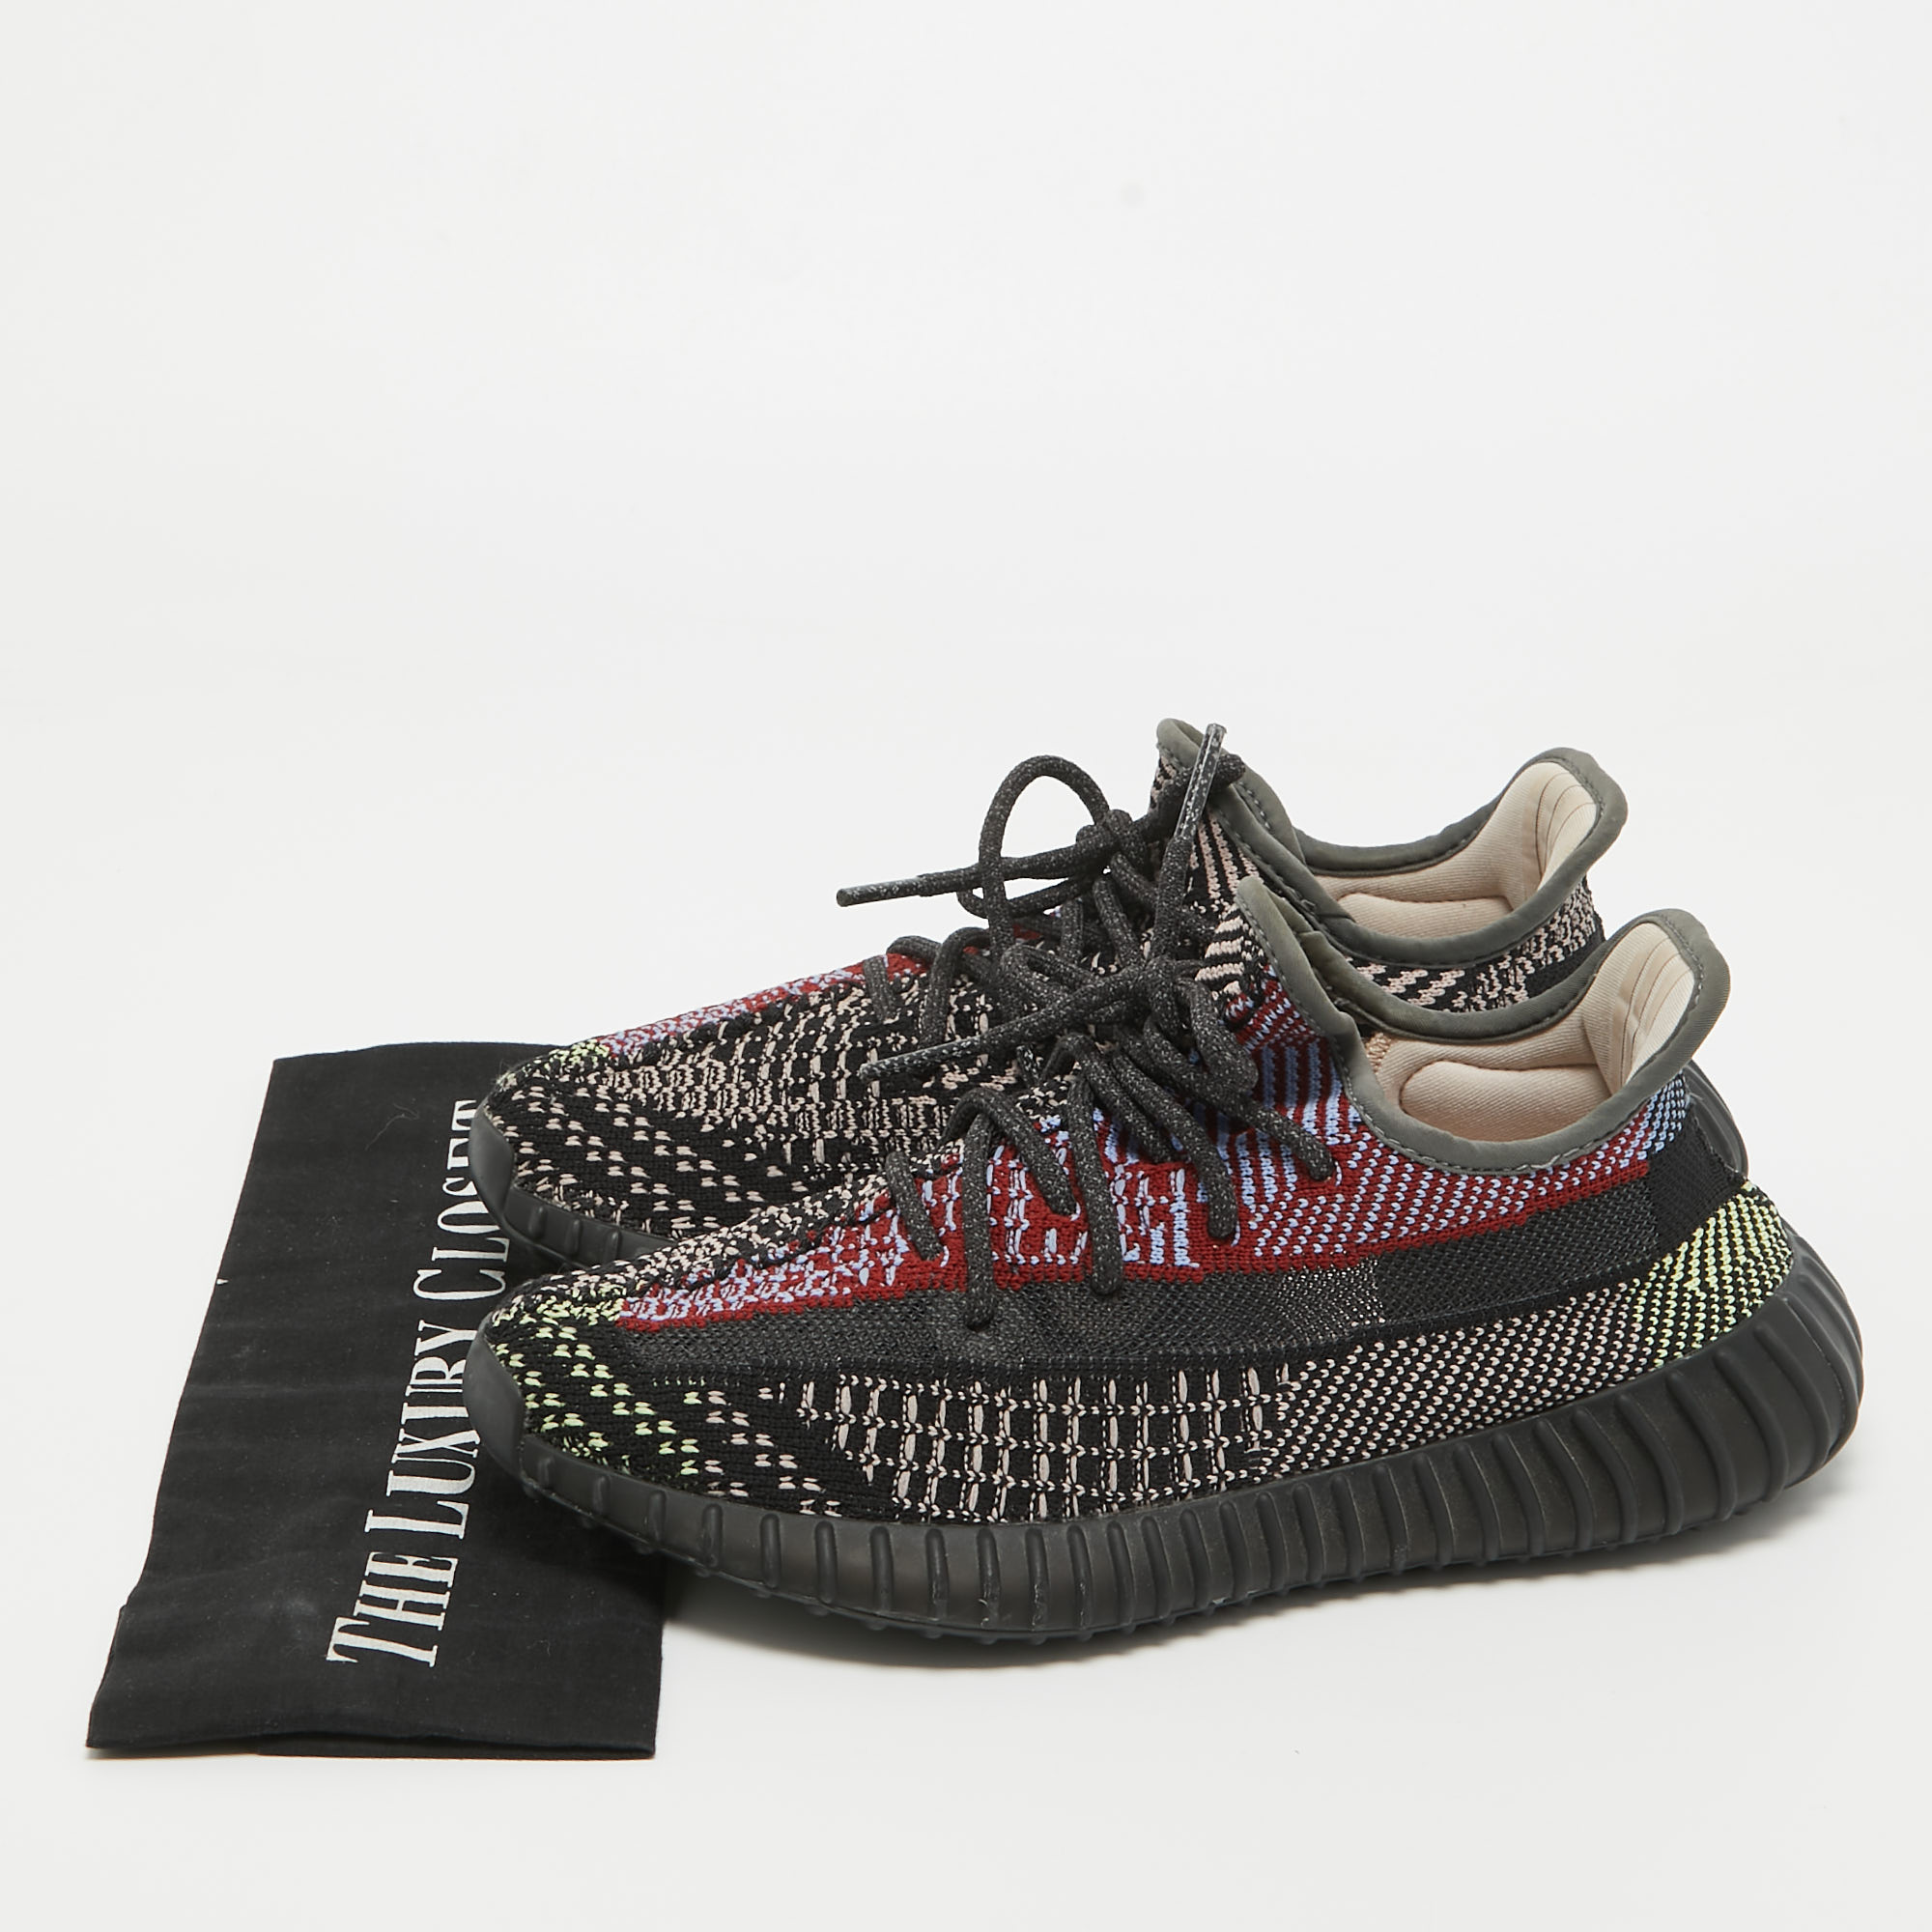 Yeezy X Adidas Black Knit Fabric Boost 350 V2 Yecheil Non-Reflective Sneakers Size 38 2/3